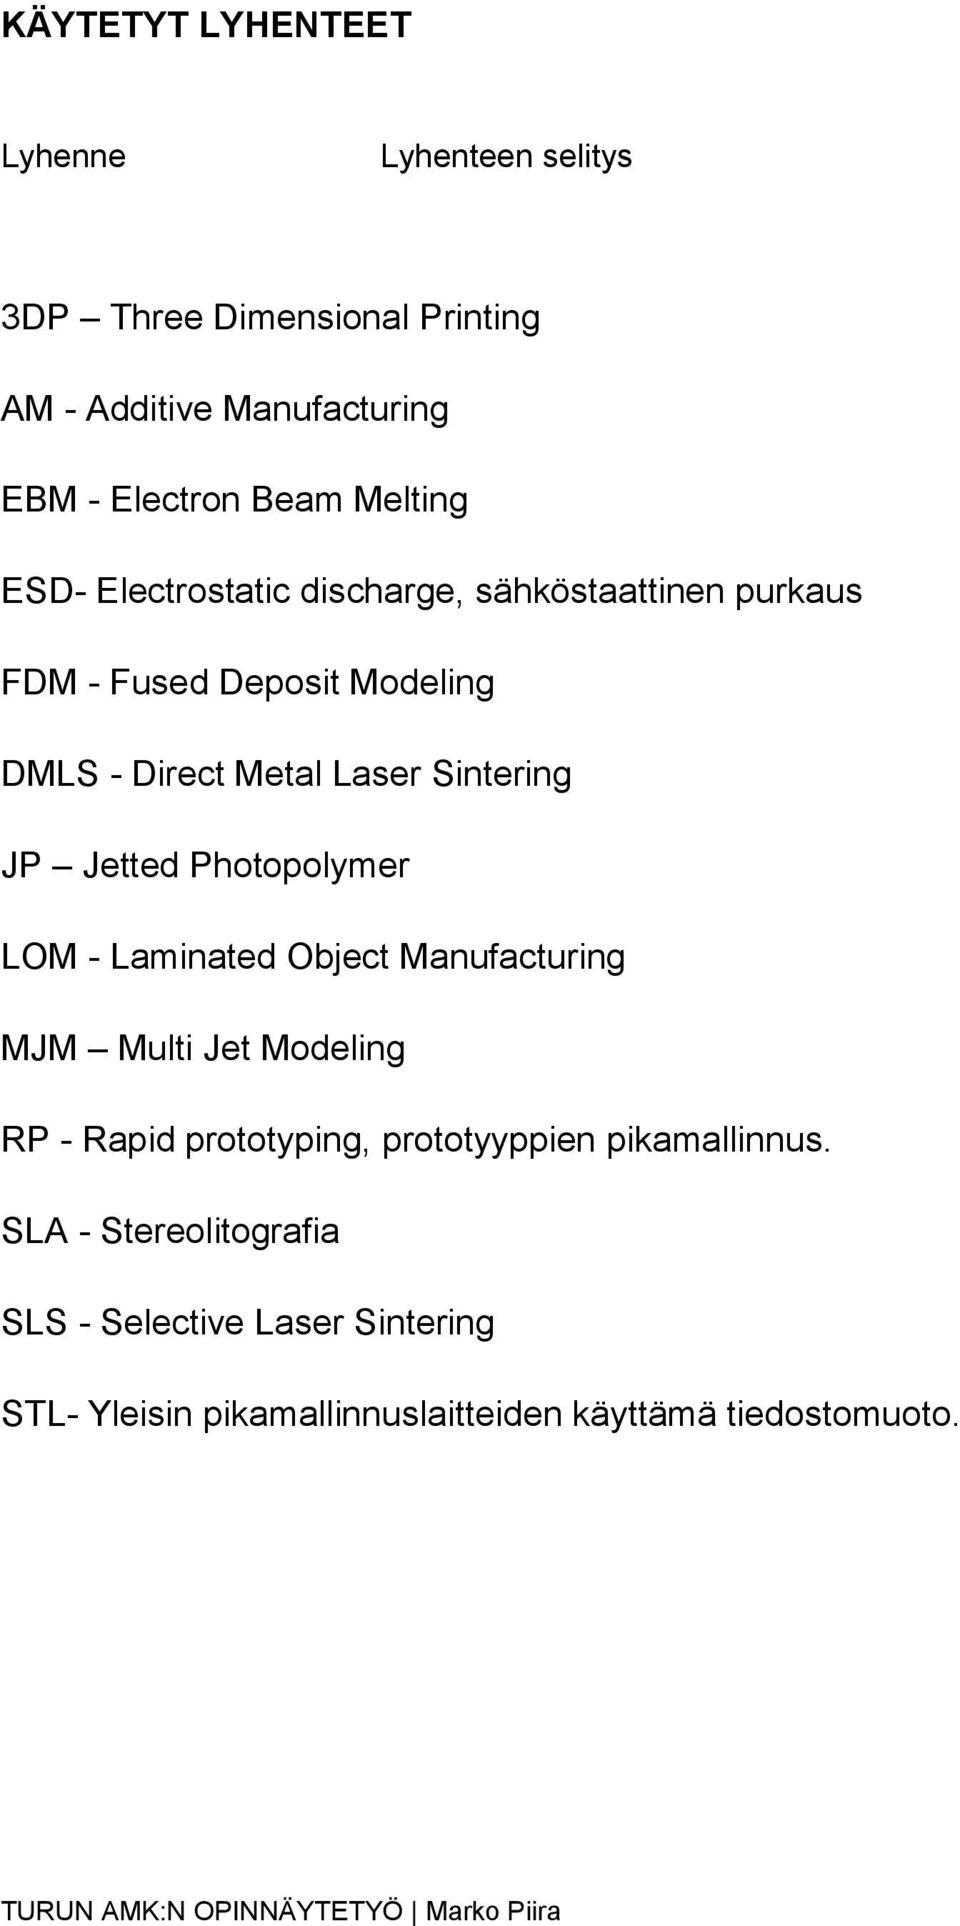 Sintering JP Jetted Photopolymer LOM - Laminated Object Manufacturing MJM Multi Jet Modeling RP - Rapid prototyping,